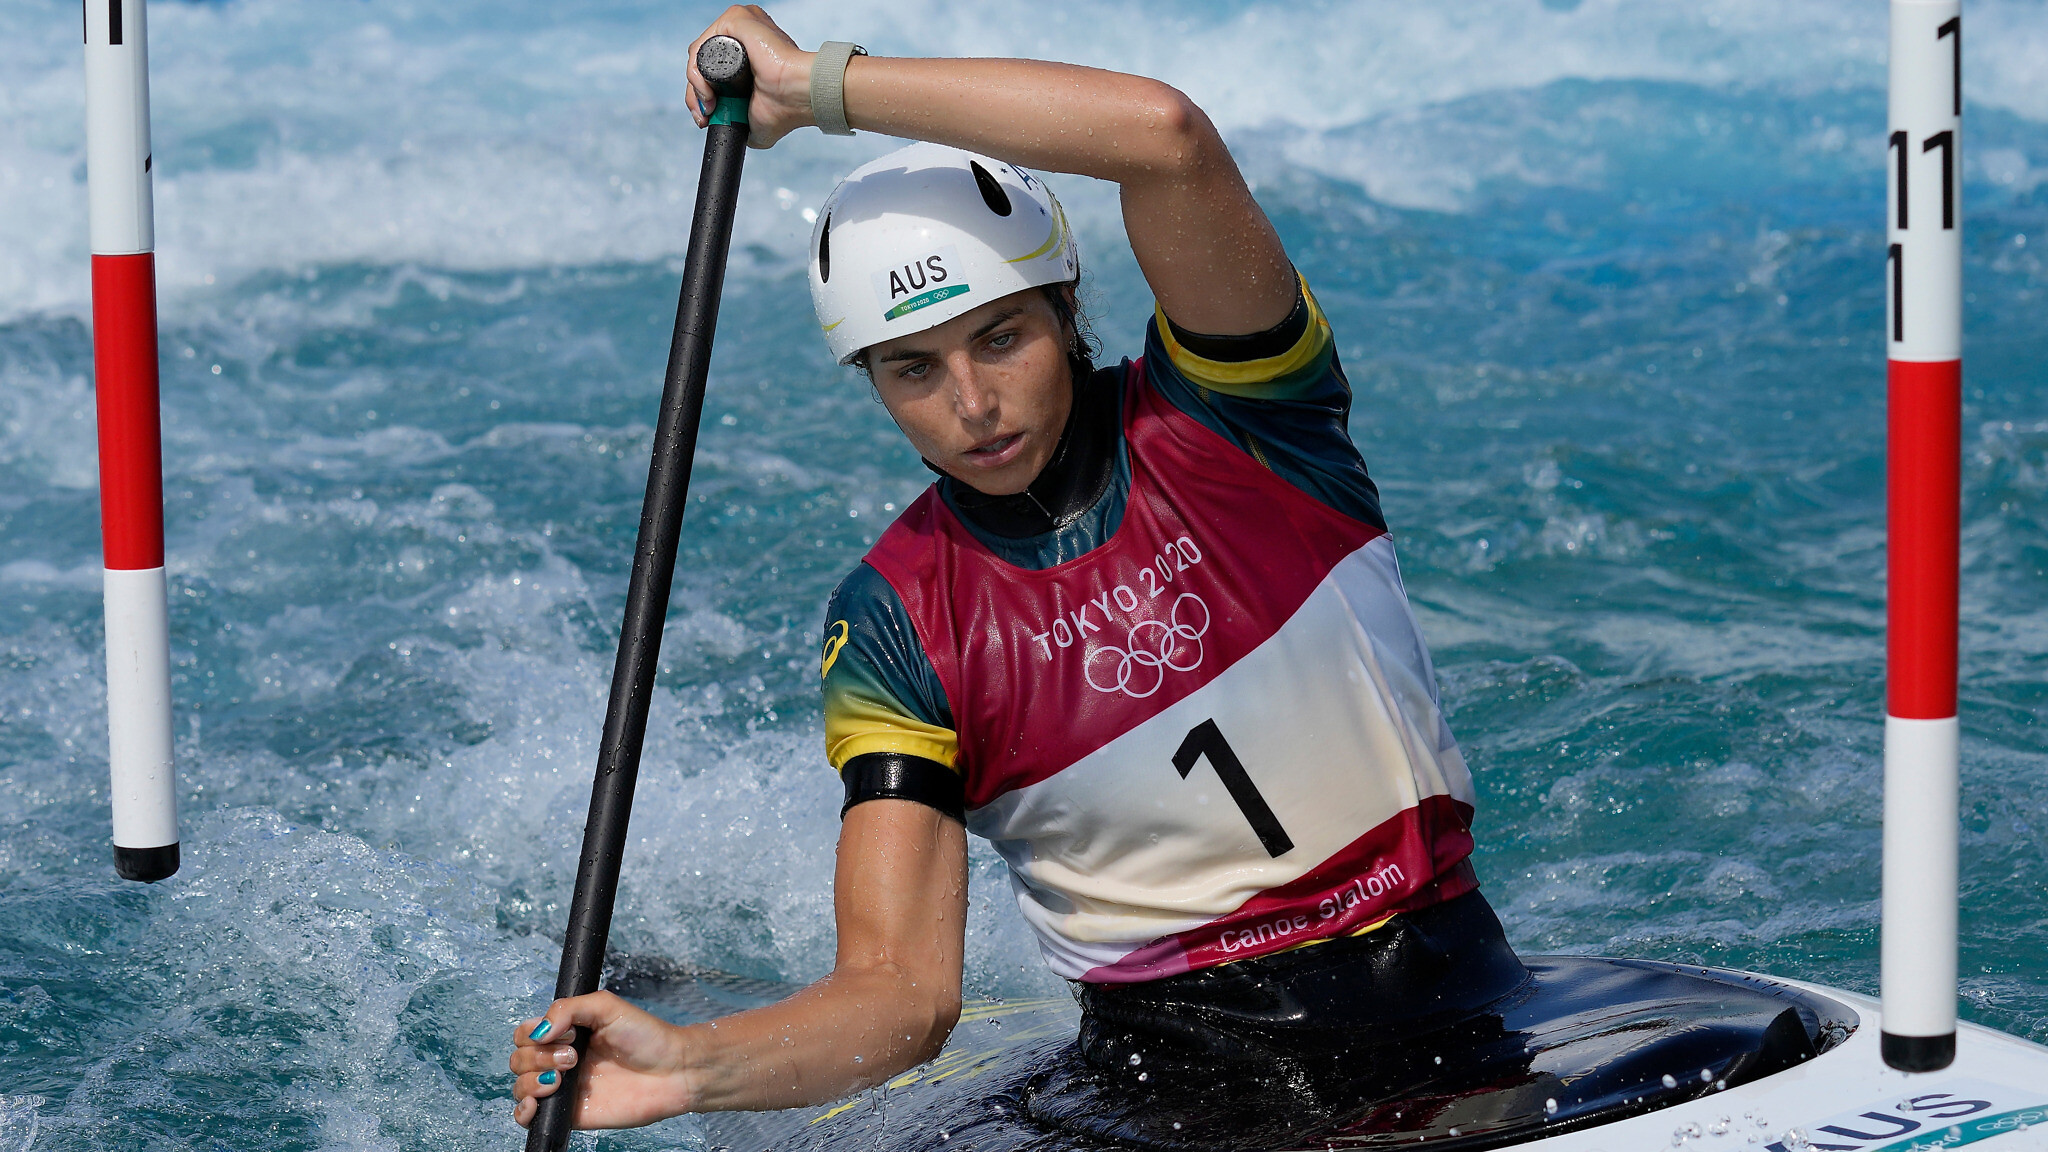 In 3rd Olympics outing, Australian Jewish paddler wins gold in canoe slalom The Times of Israel